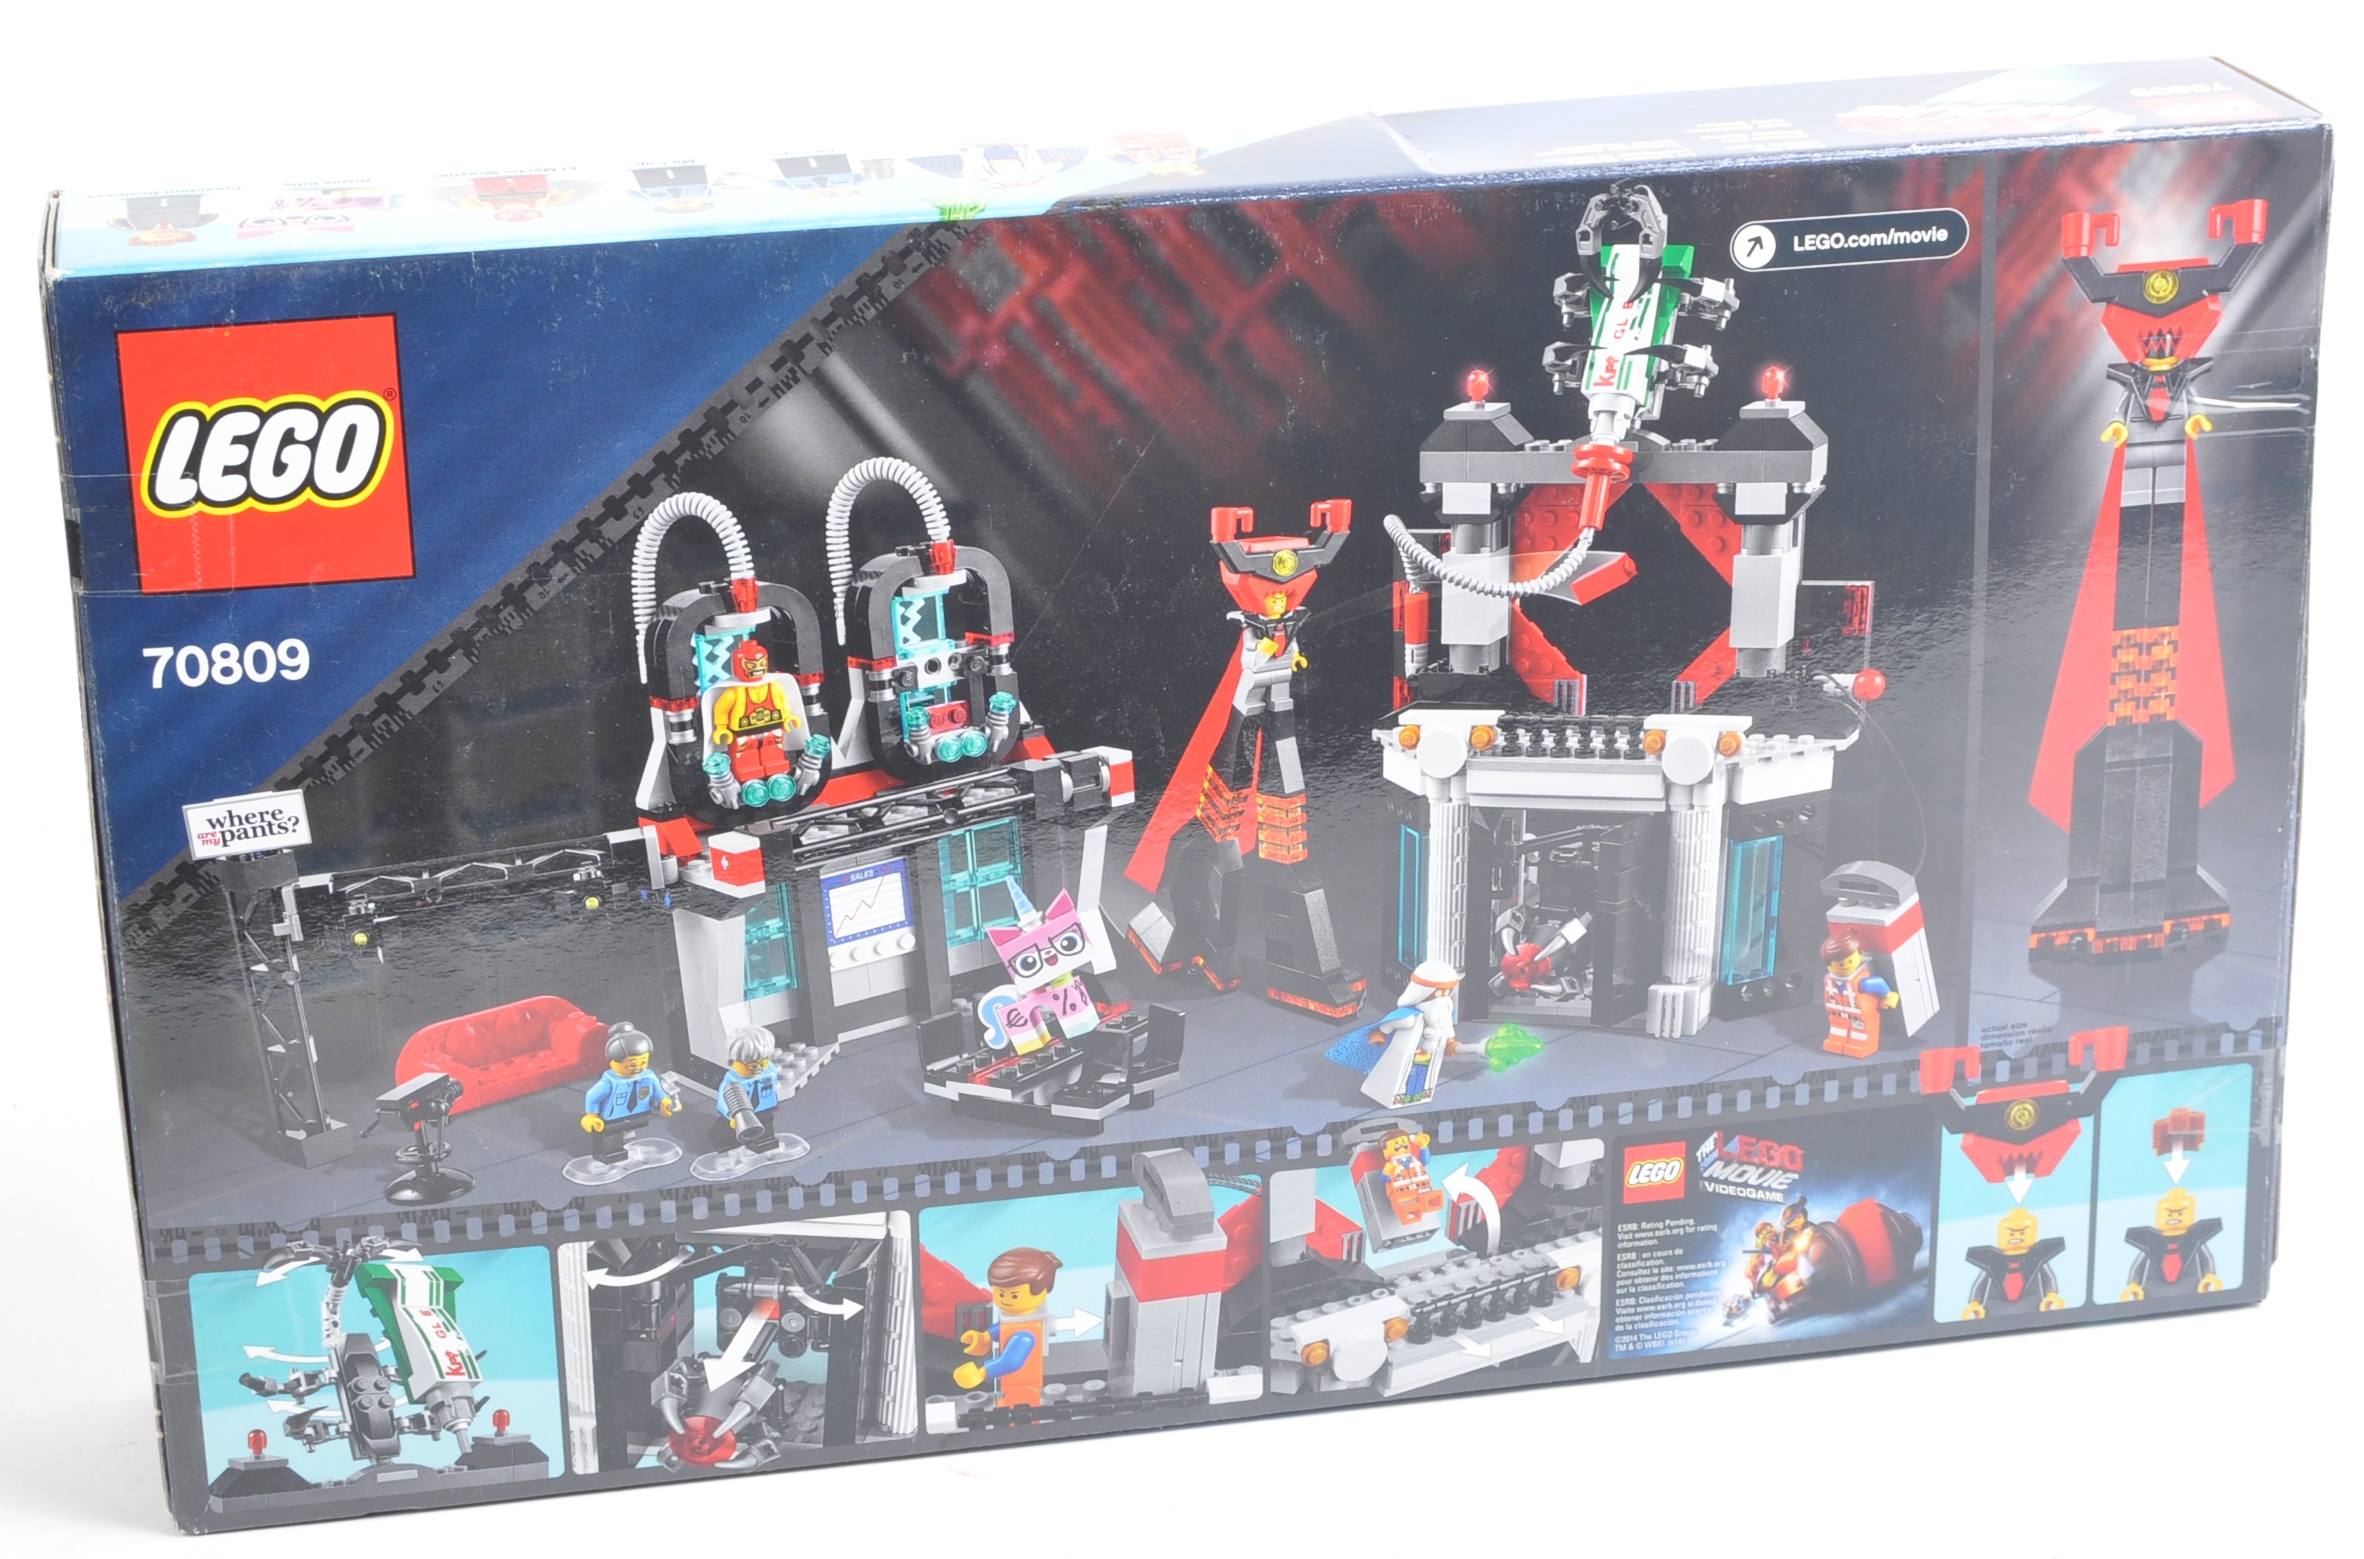 LEGO SET - THE LEGO MOVIE - 70809 - LORD BUSINESS' EVIL LAIR - Image 2 of 4